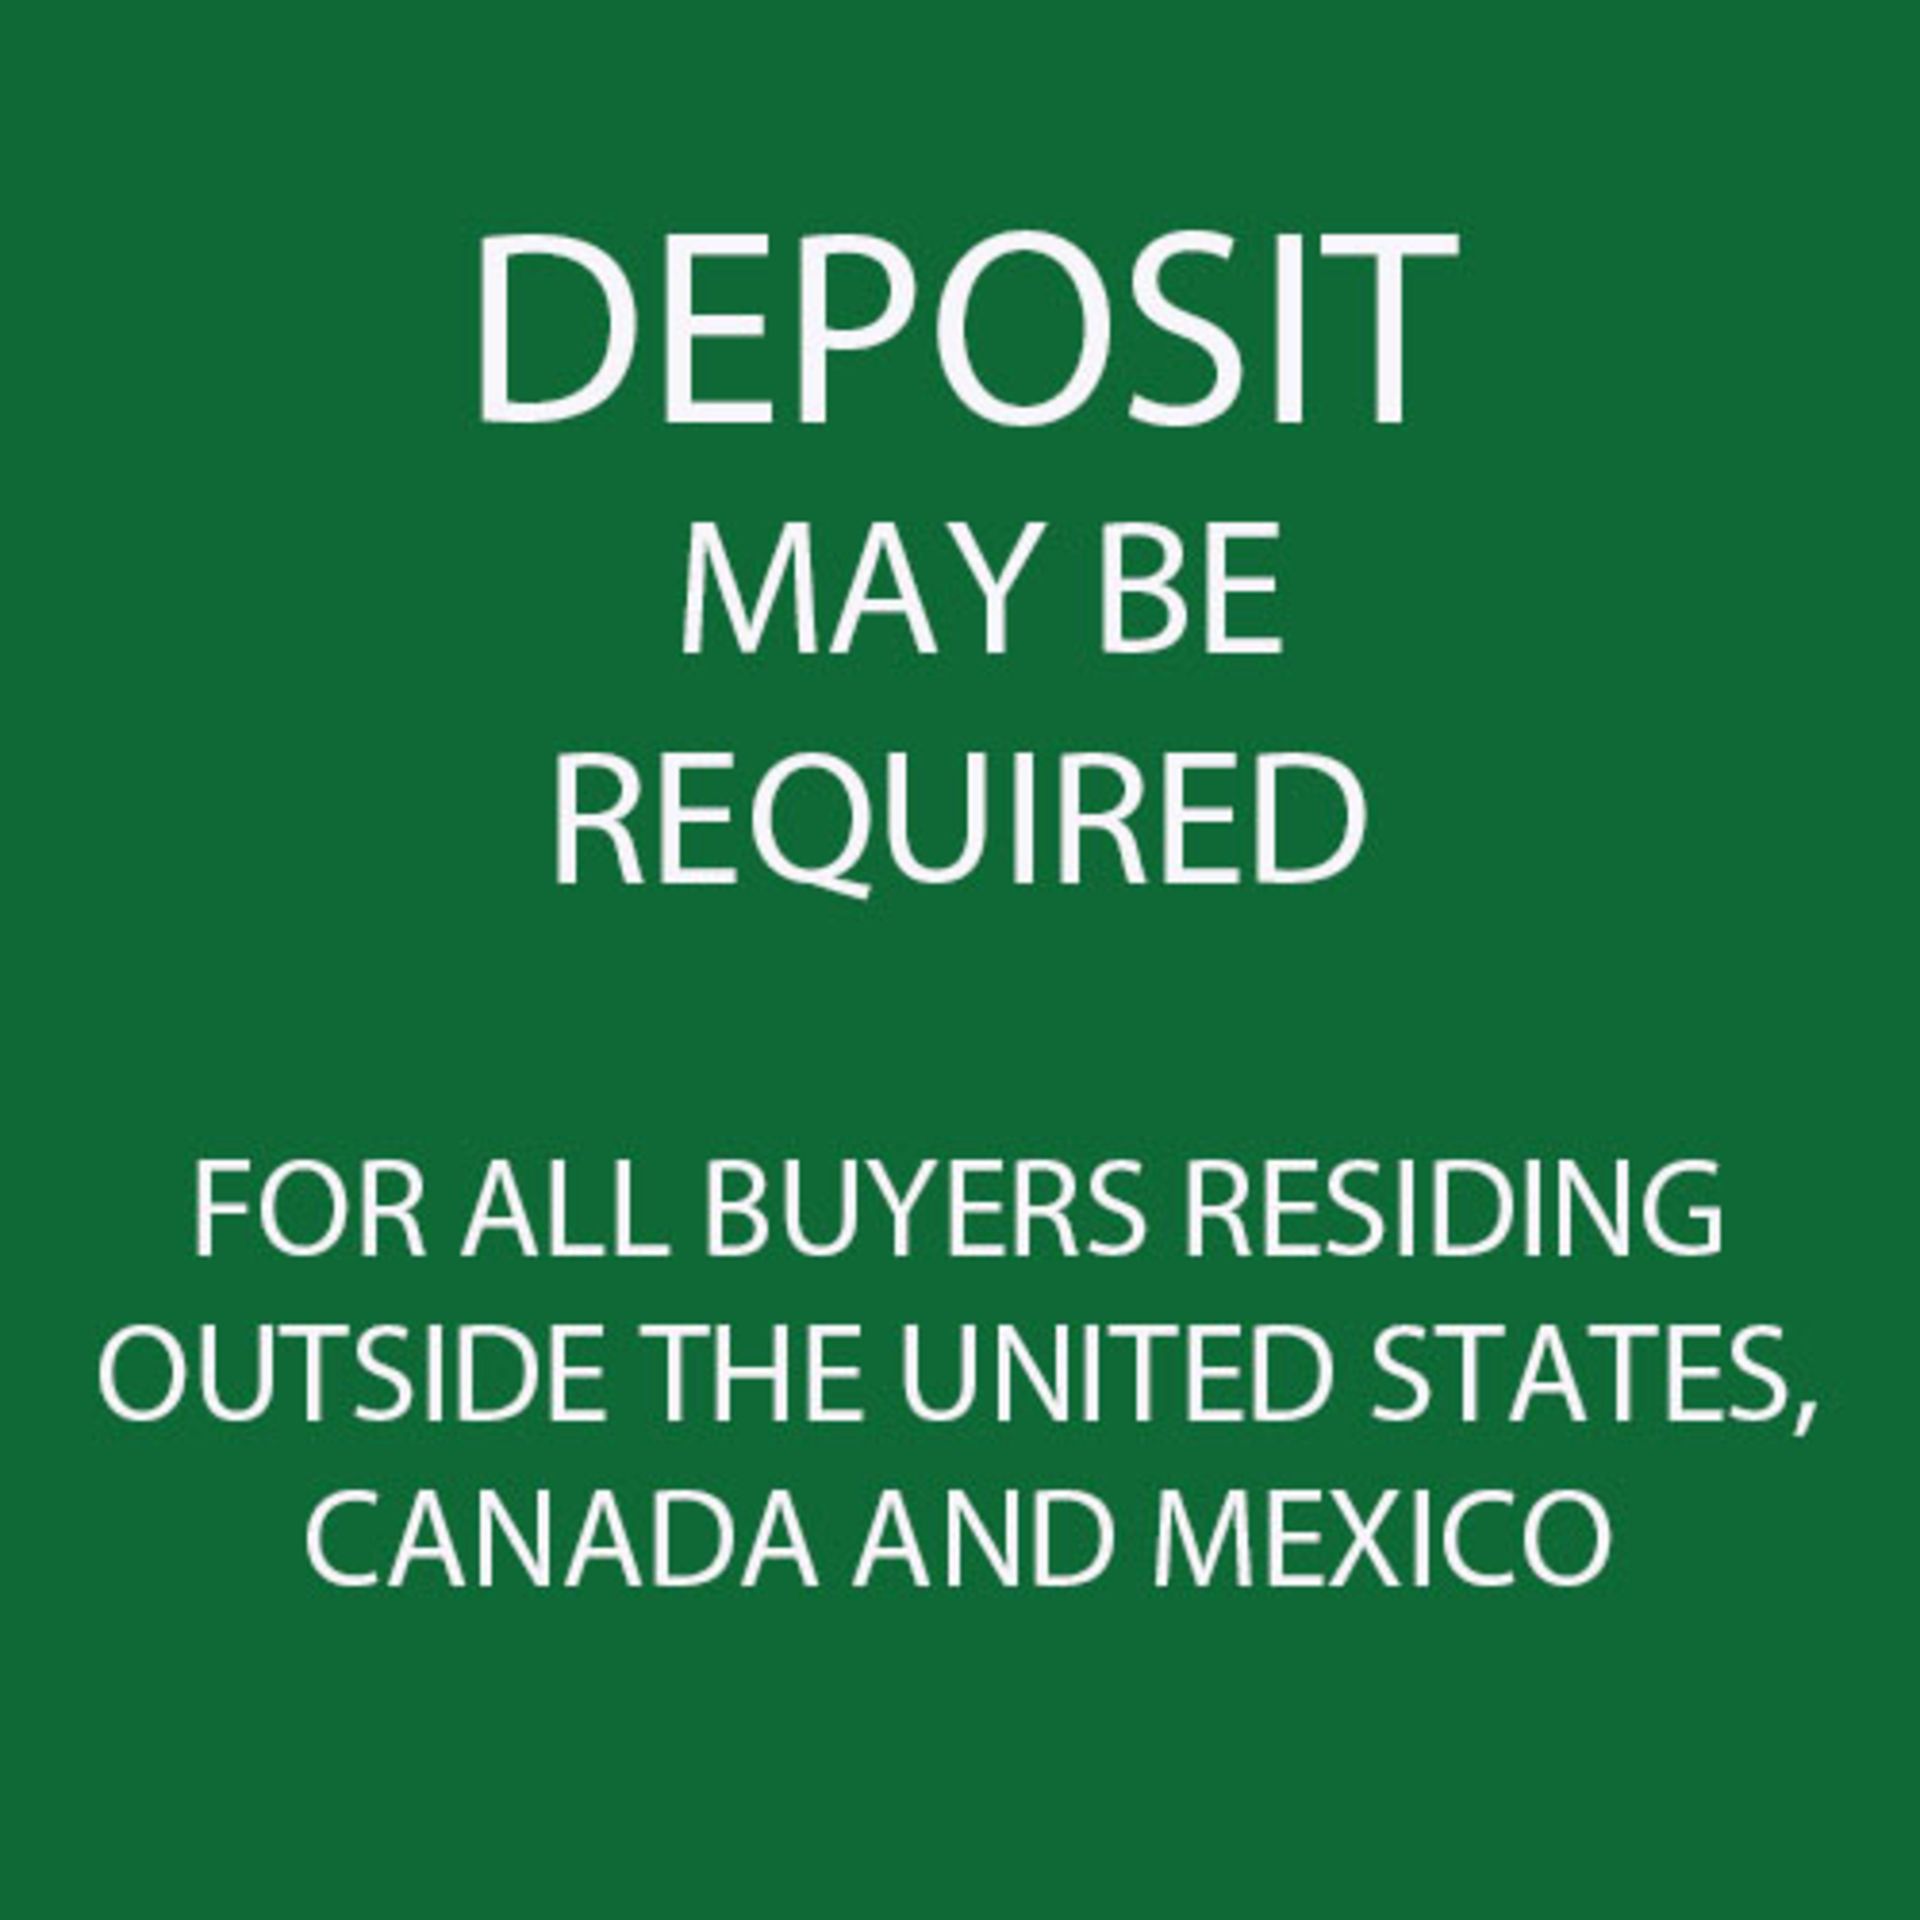 BUYERS LOCATED OUTSIDE THE UNITED STATES, CANADA, OR MEXICO WILL BE REQUIRED TO PROVIDE A DEPOSIT